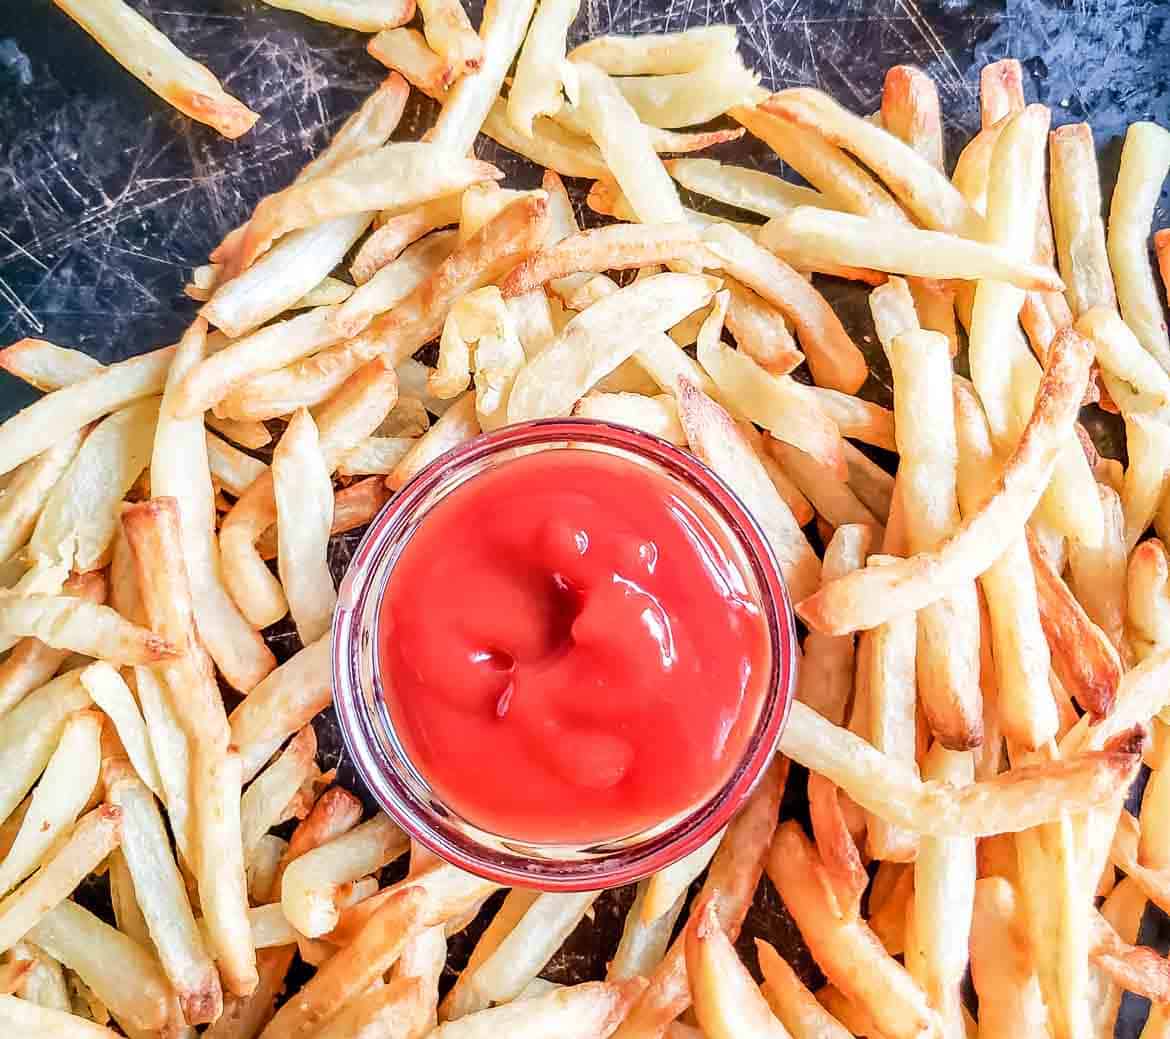 ActiFry French Fries Recipe for Crispy Low Fat Fries